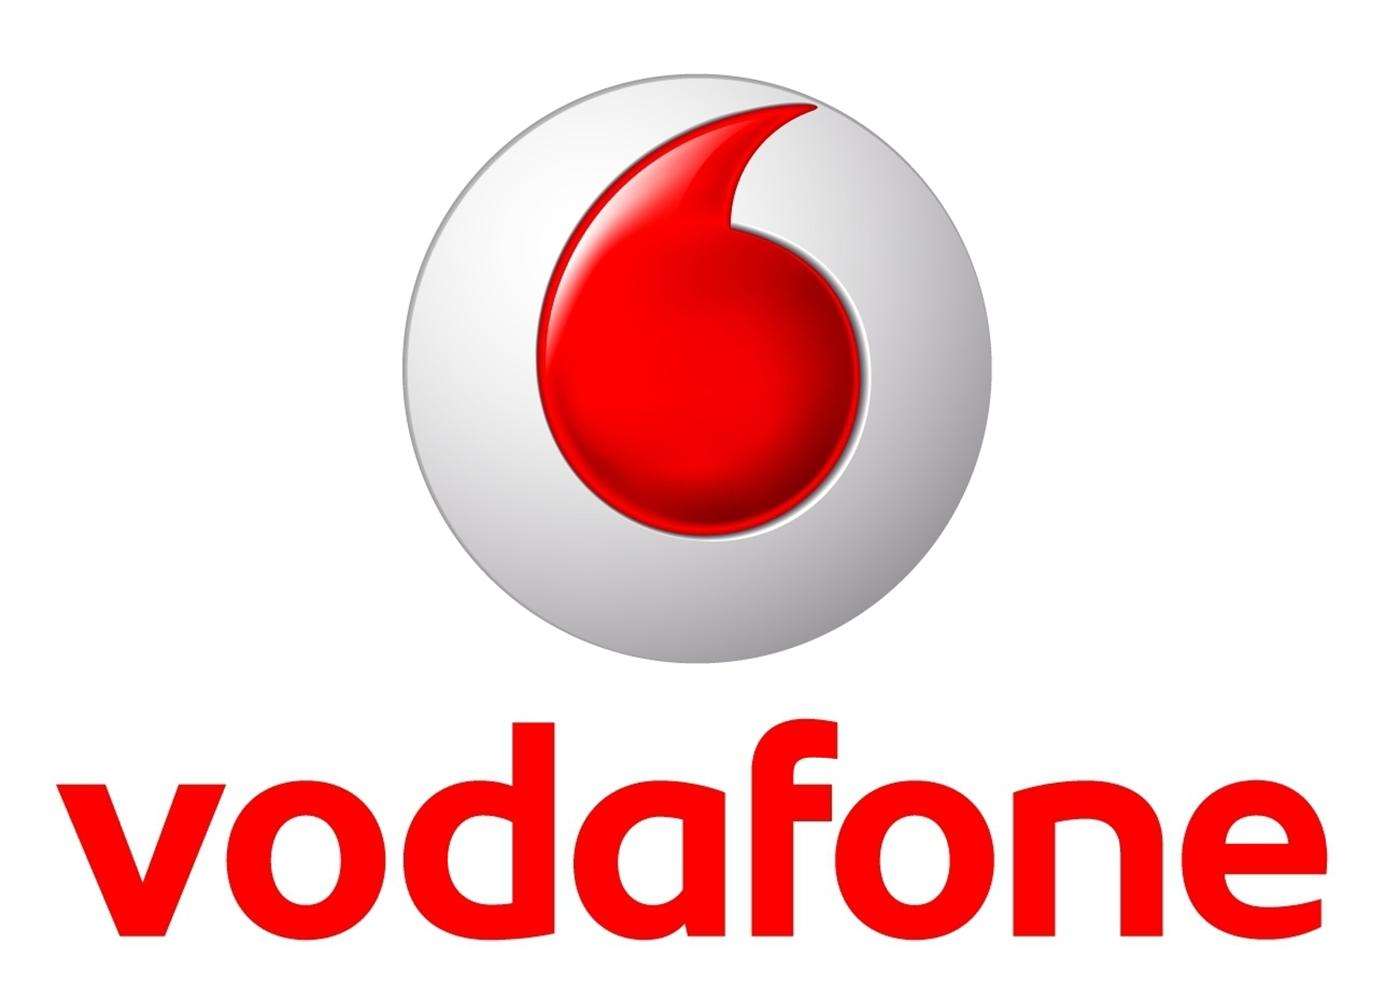 Vodafone has been experiencing problems. Stock picture